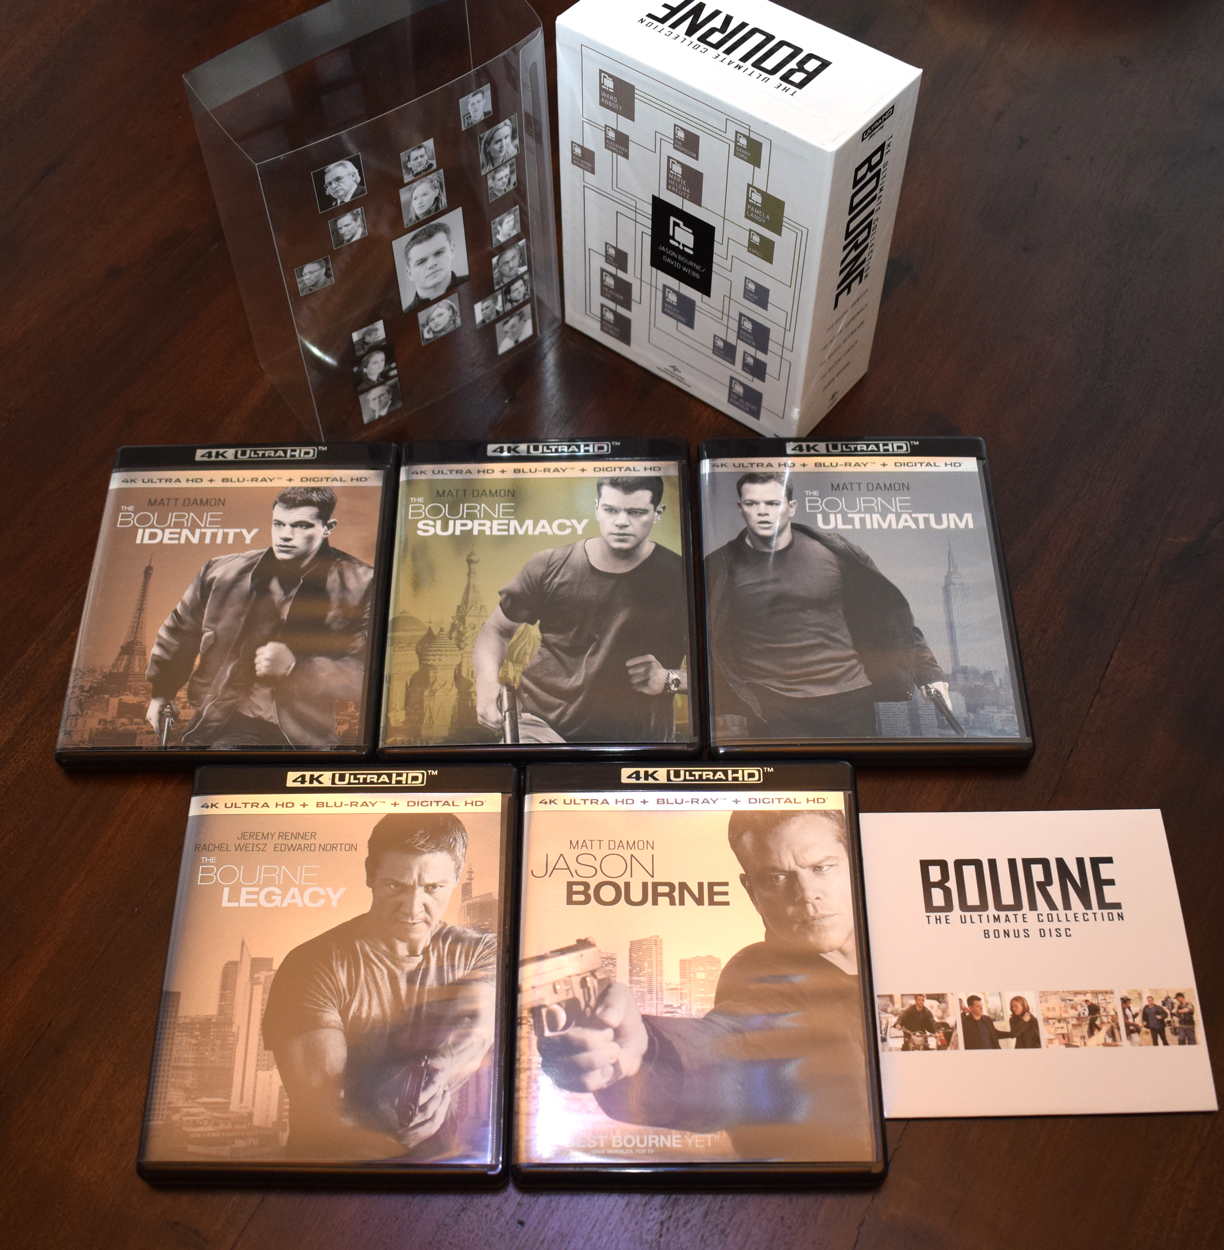 Bourne The Ultimate Collection Ultra HD Blu-ray Review box set and contents